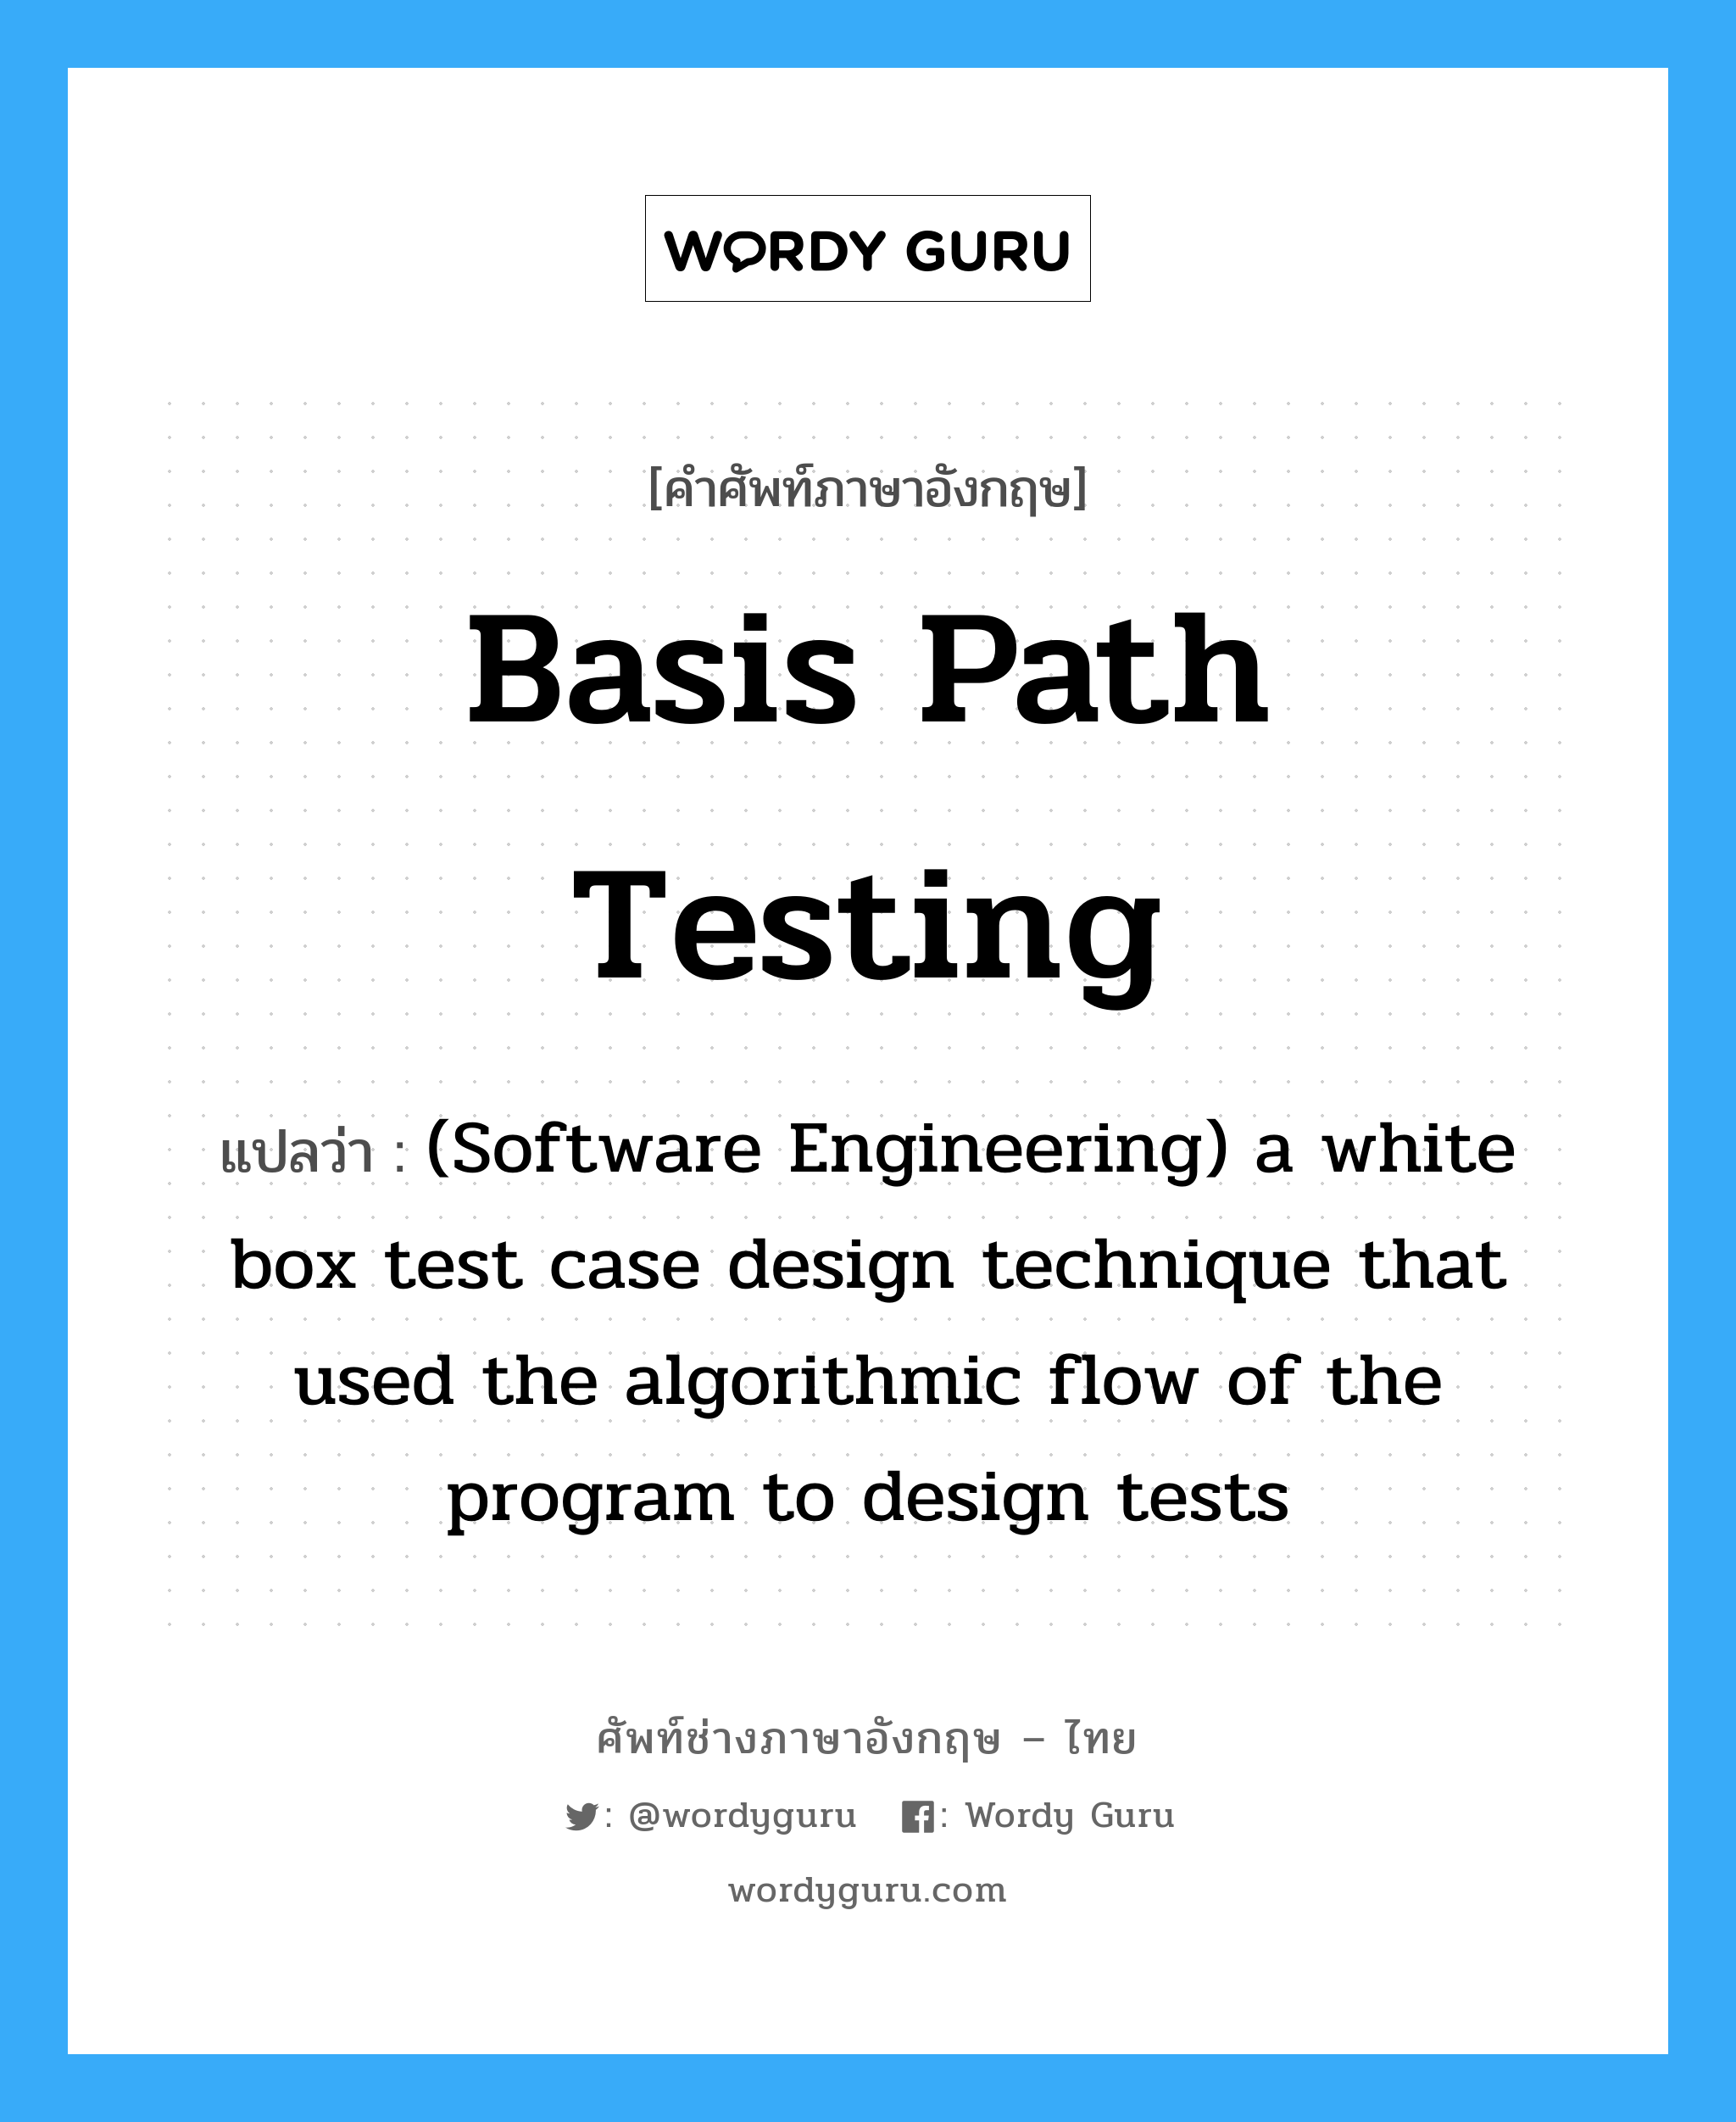 Basis path testing แปลว่า?, คำศัพท์ช่างภาษาอังกฤษ - ไทย Basis path testing คำศัพท์ภาษาอังกฤษ Basis path testing แปลว่า (Software Engineering) a white box test case design technique that used the algorithmic flow of the program to design tests